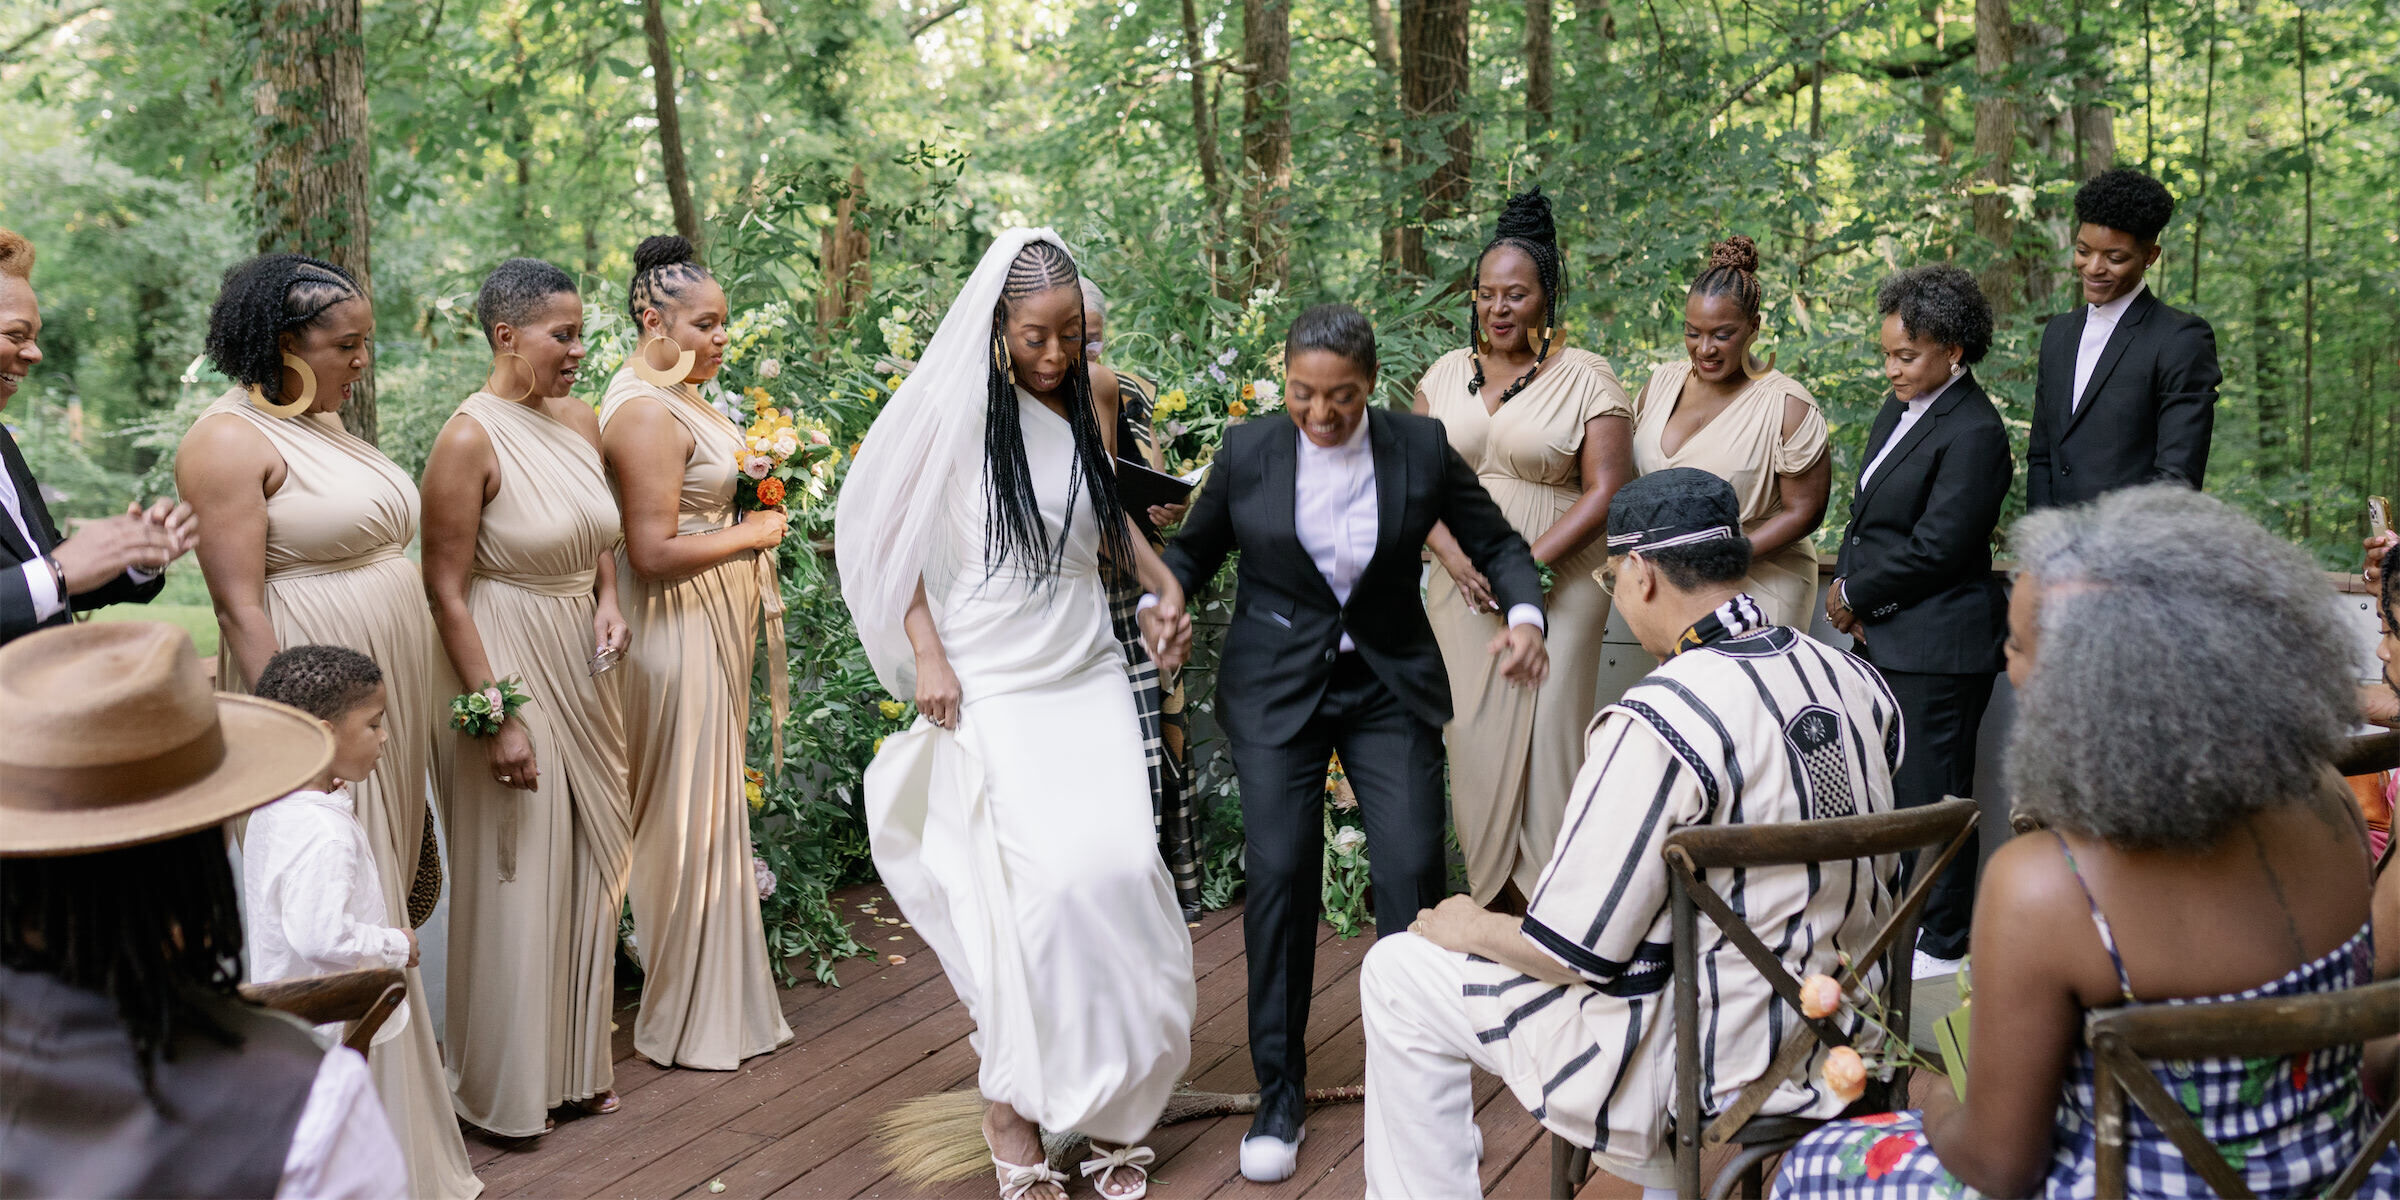 A happy couple jumps the broom at the end of their authentic modern wedding ceremony in Atlanta.